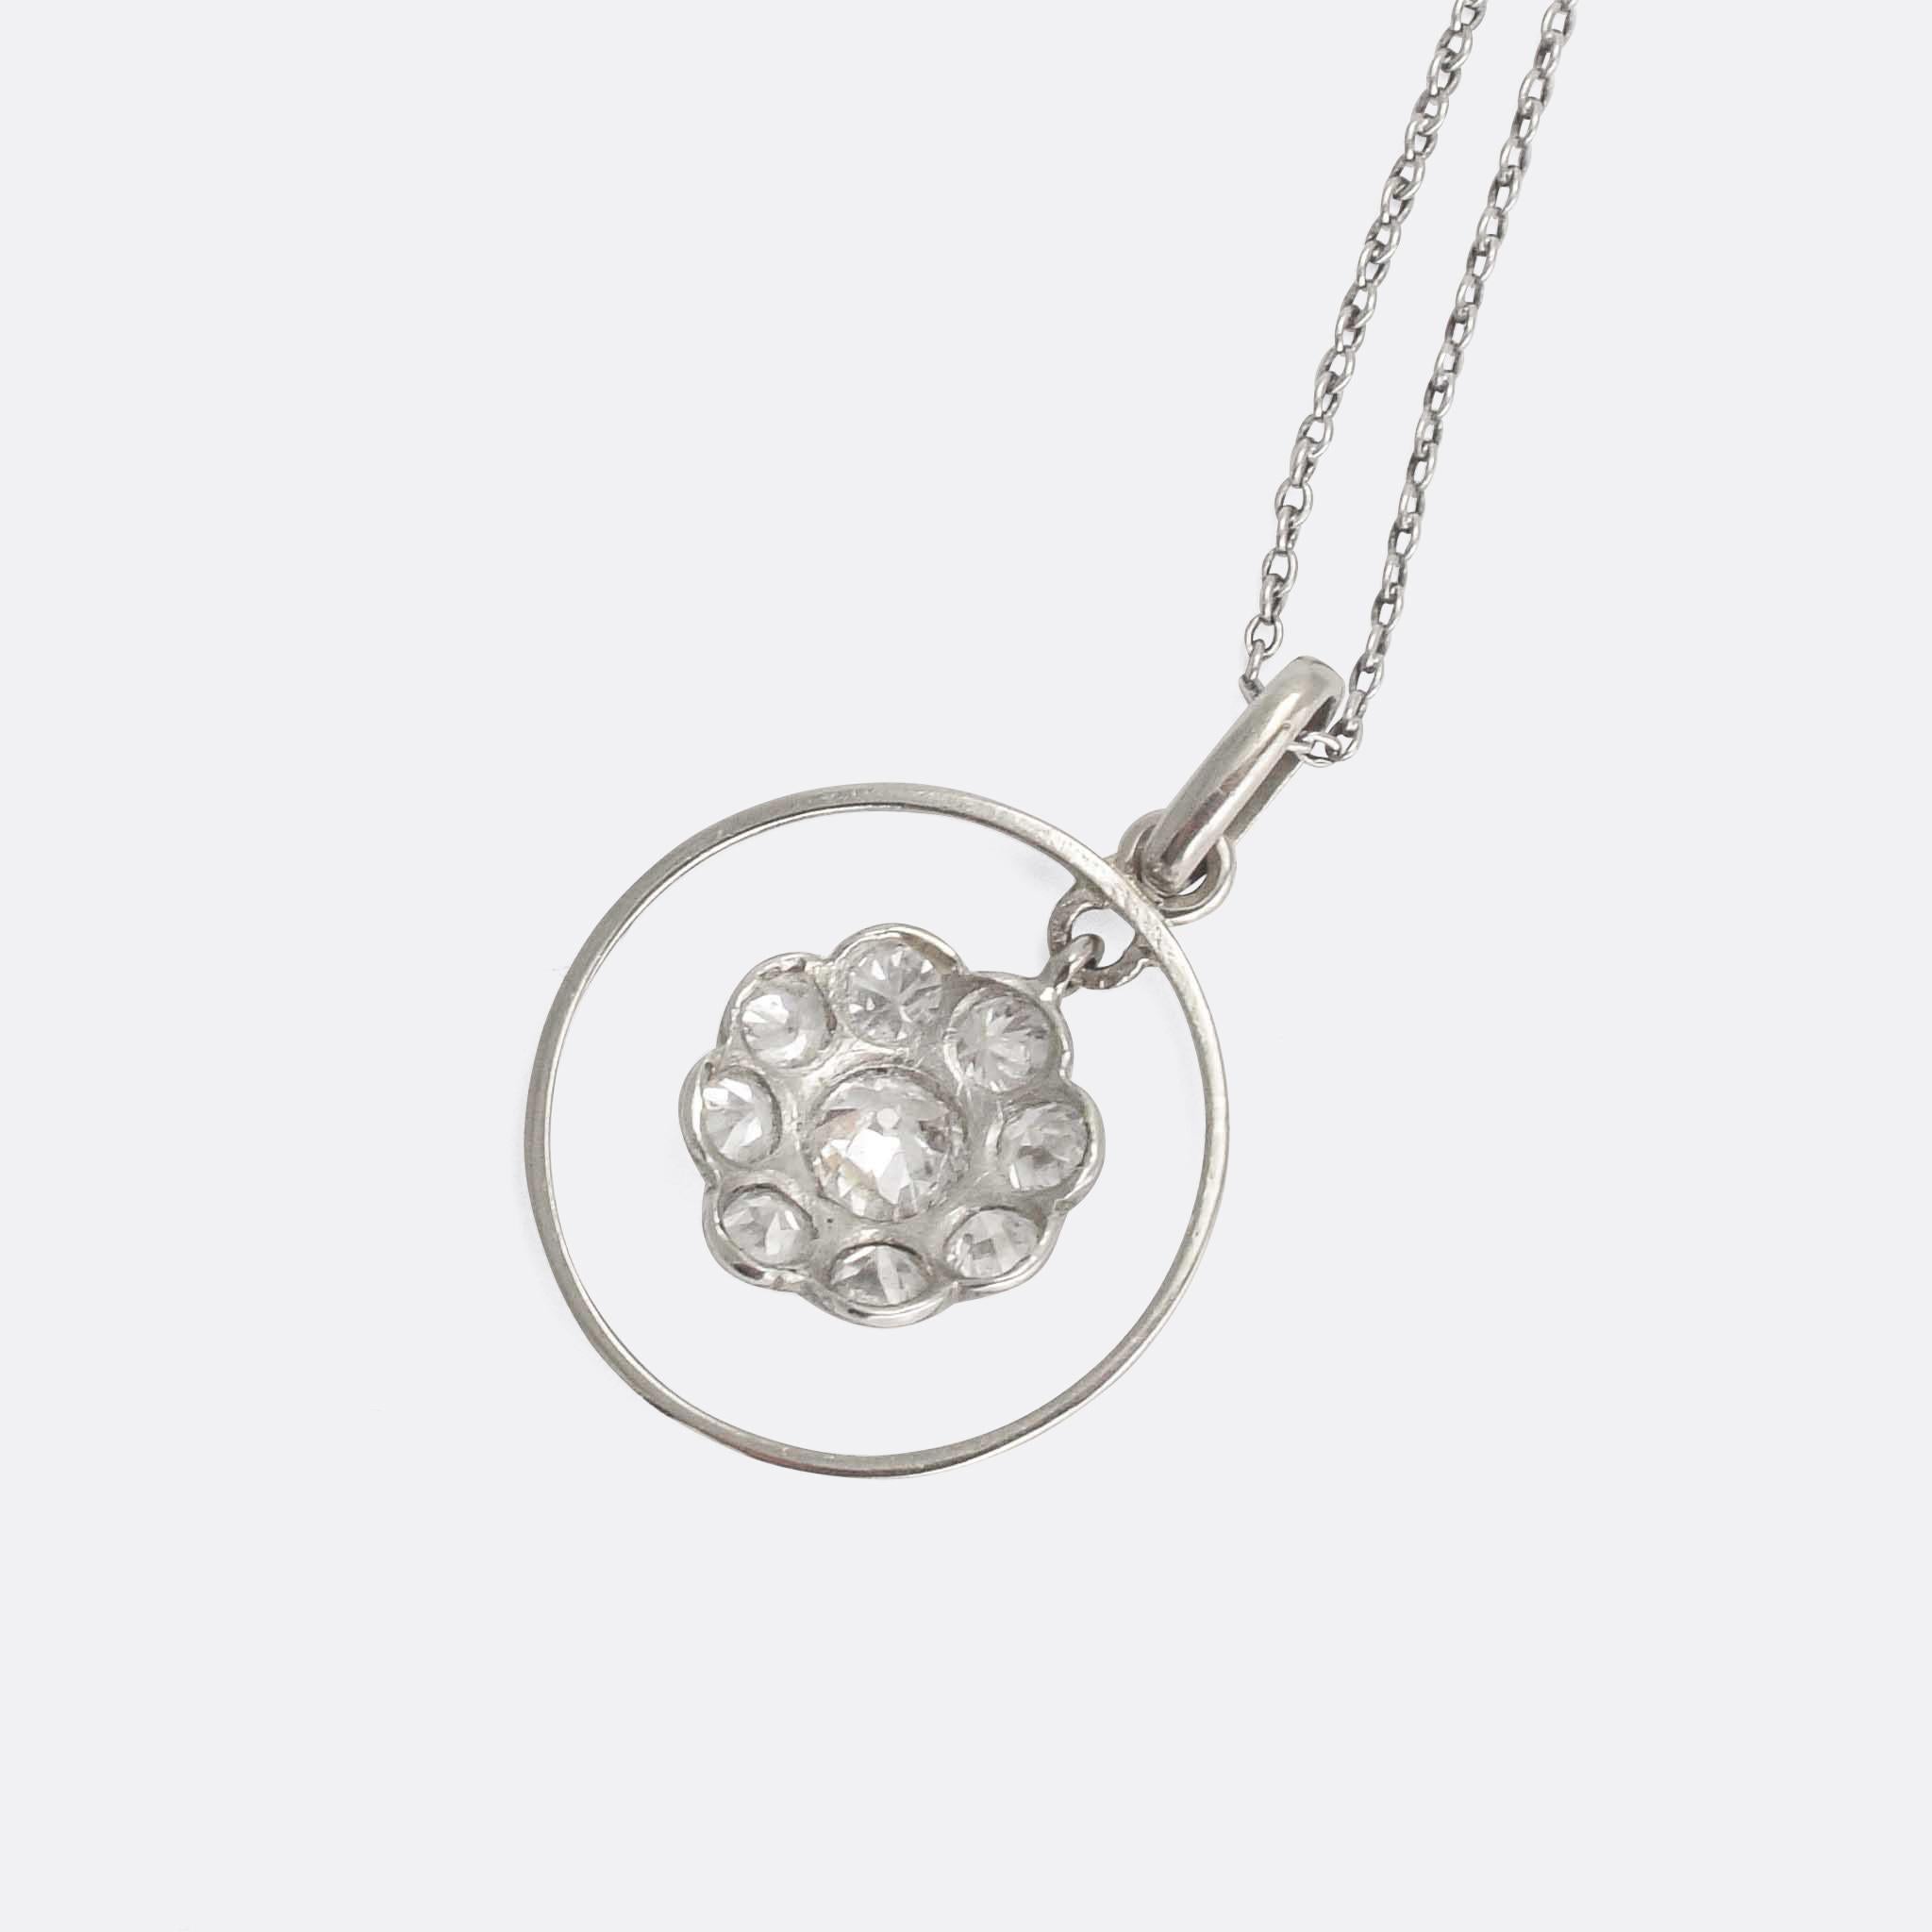 A beautiful and understated Edwardian necklace. The pendant is modelled as a daisy, fully set with diamonds, and dangling within a platinum halo. Offered with a 15k white gold trace chain, it epitomises the refinement of the Edwardian era.

STONES